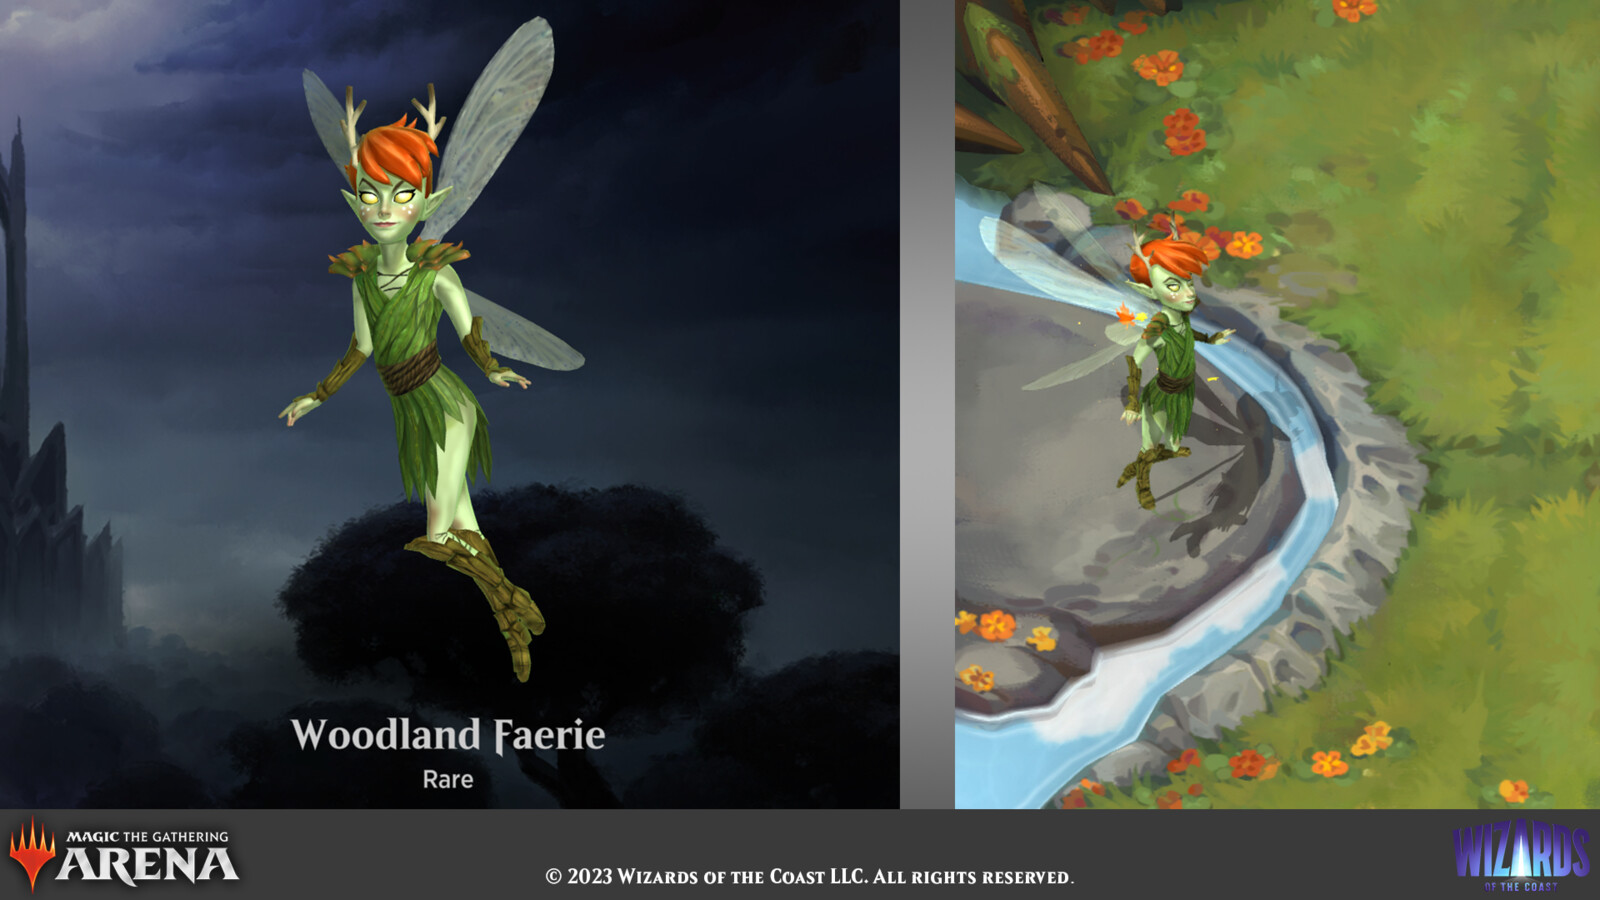 Select companion and game views for the Woodland Faerie